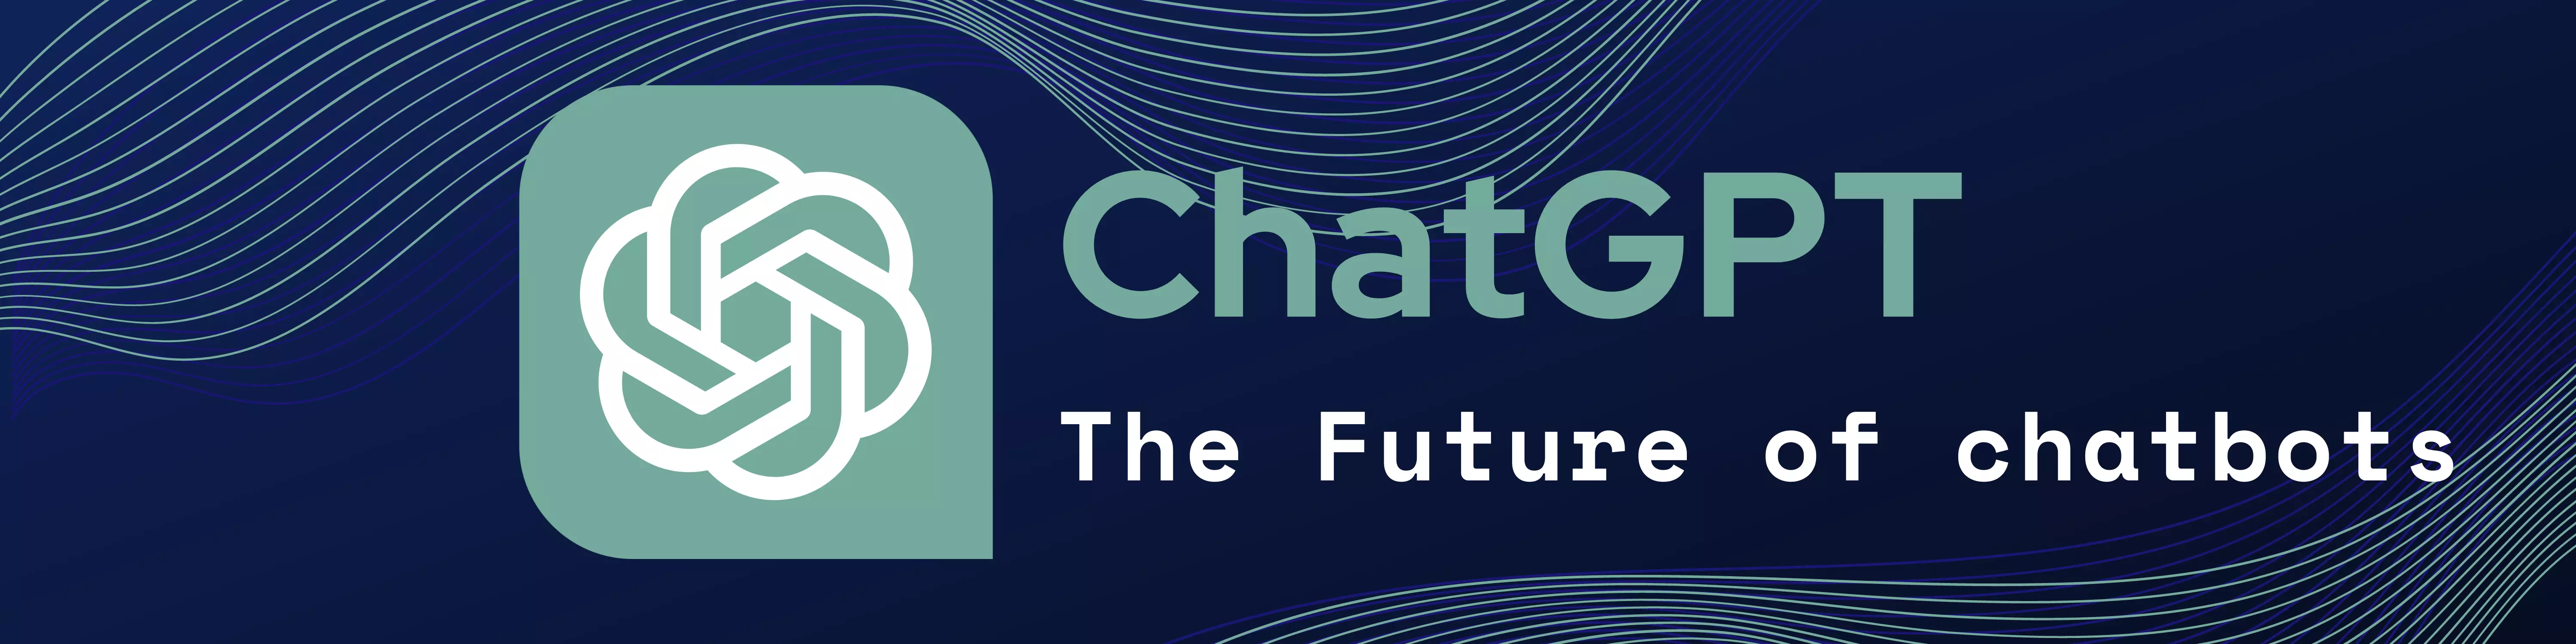 ChatGPT: The Future of Chatbots 